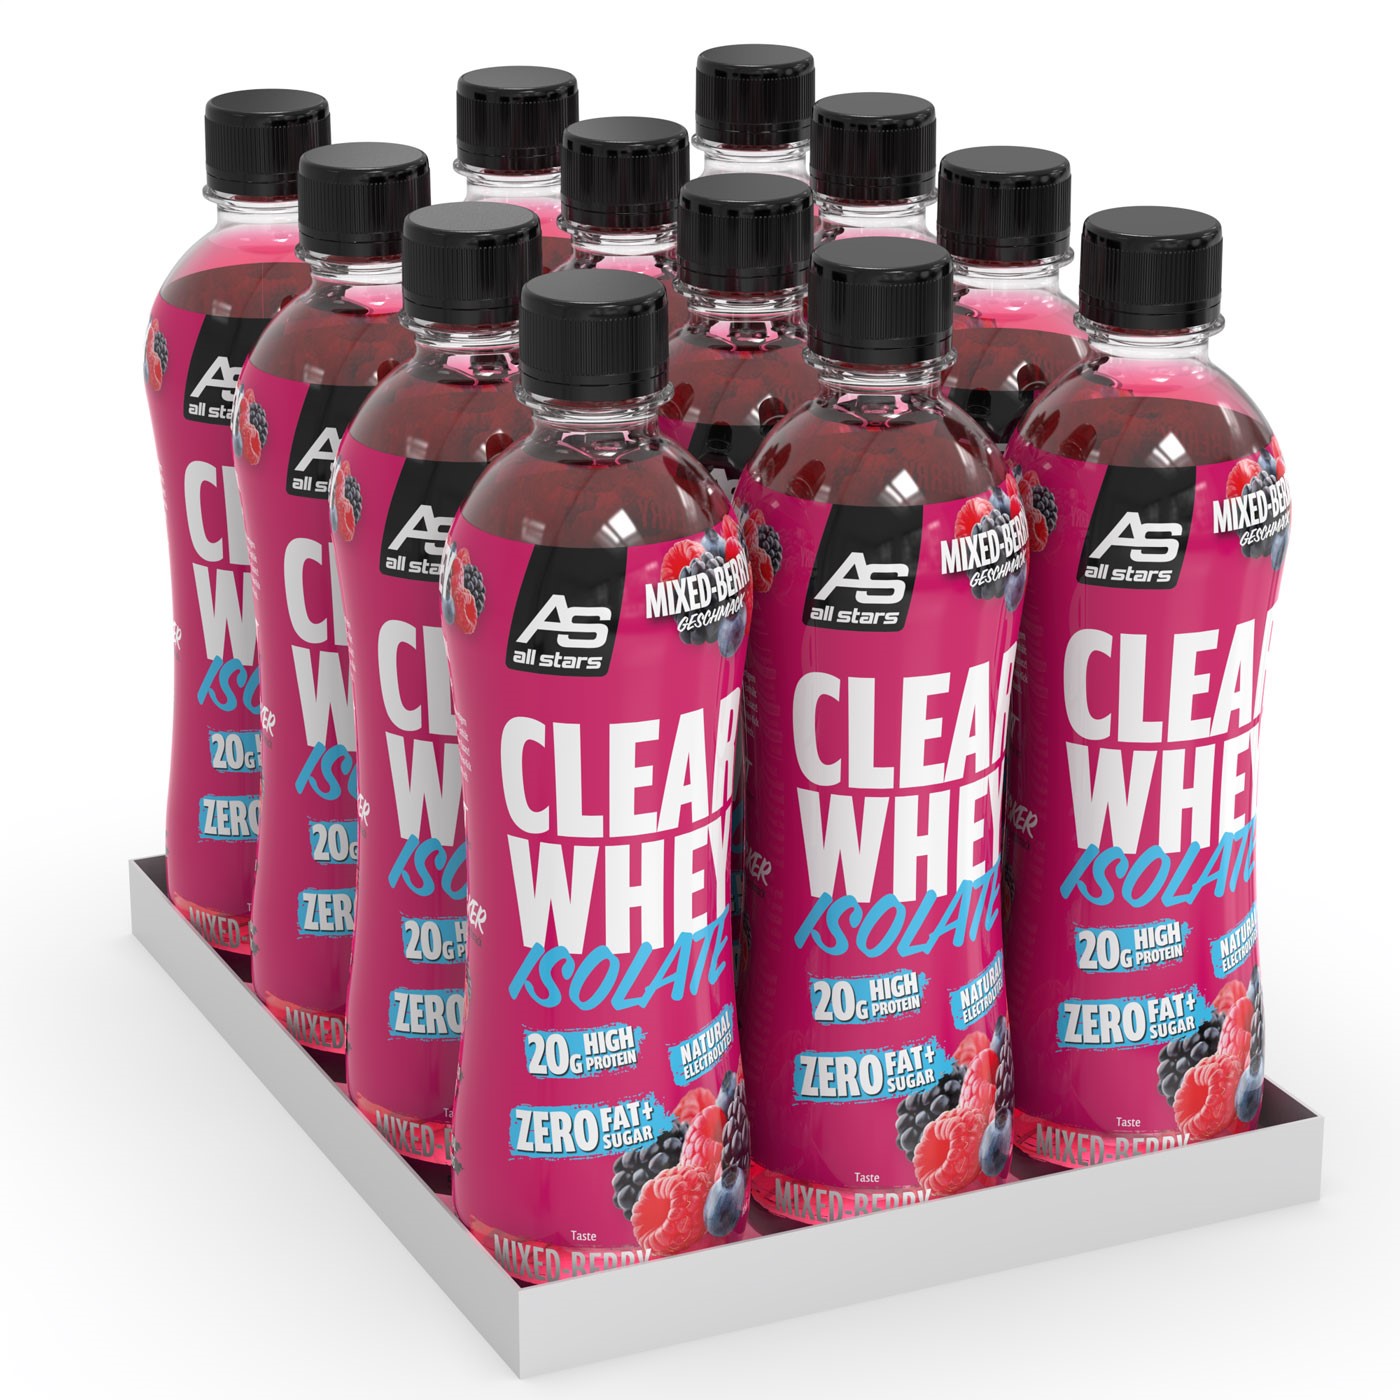 ALL STARS CLEAR WHEY ISOLATE MIXED BERRY